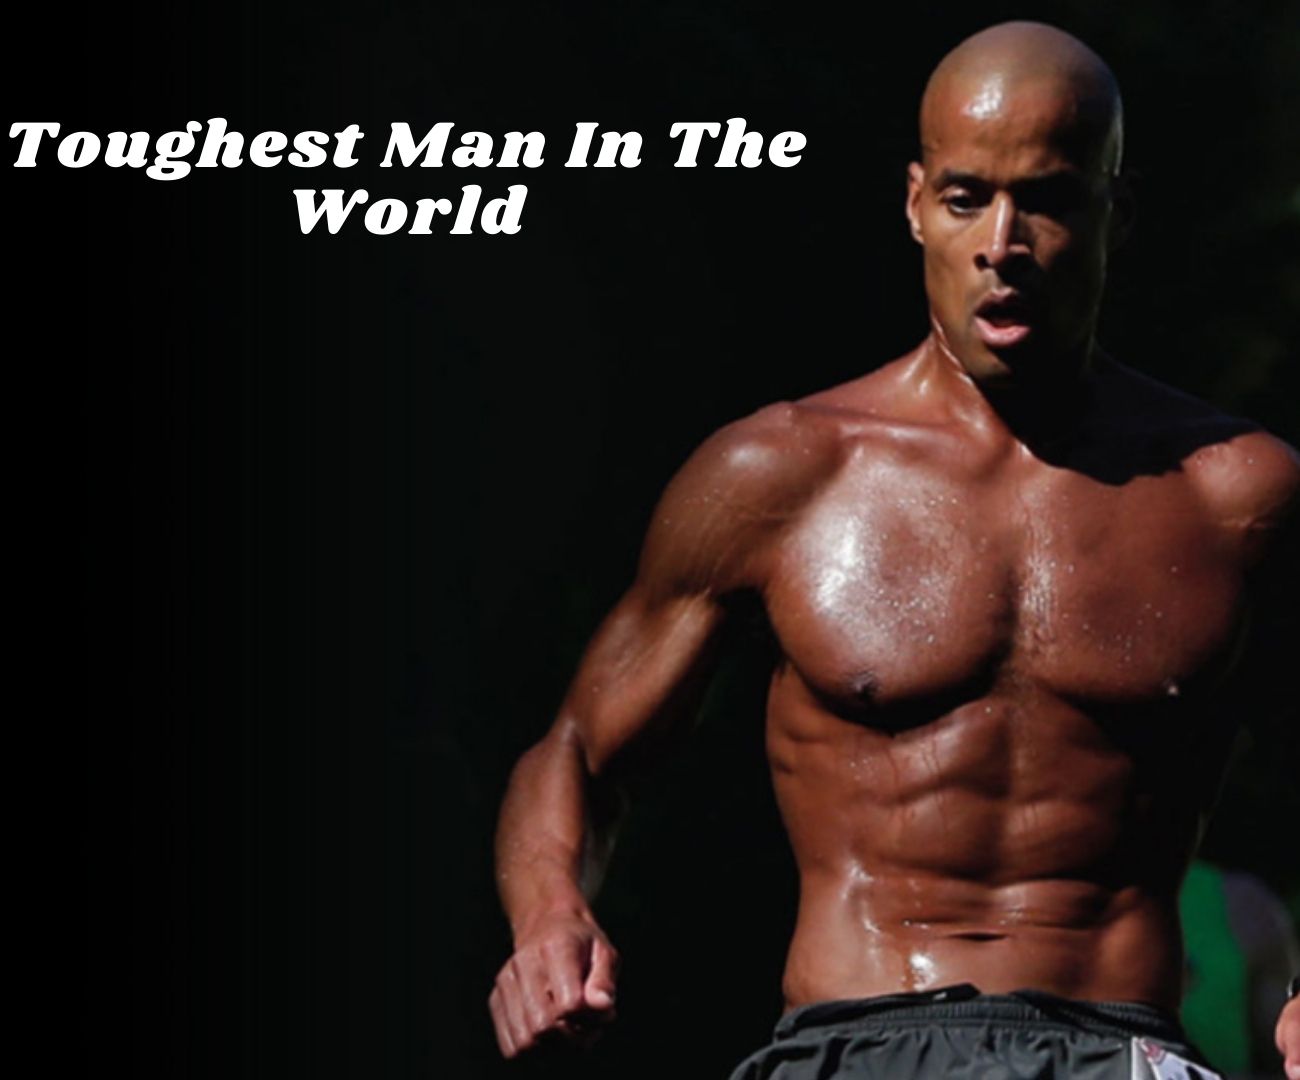 Top 30 David Goggins Quotes To Change Your Life Forever - Mindsetopia